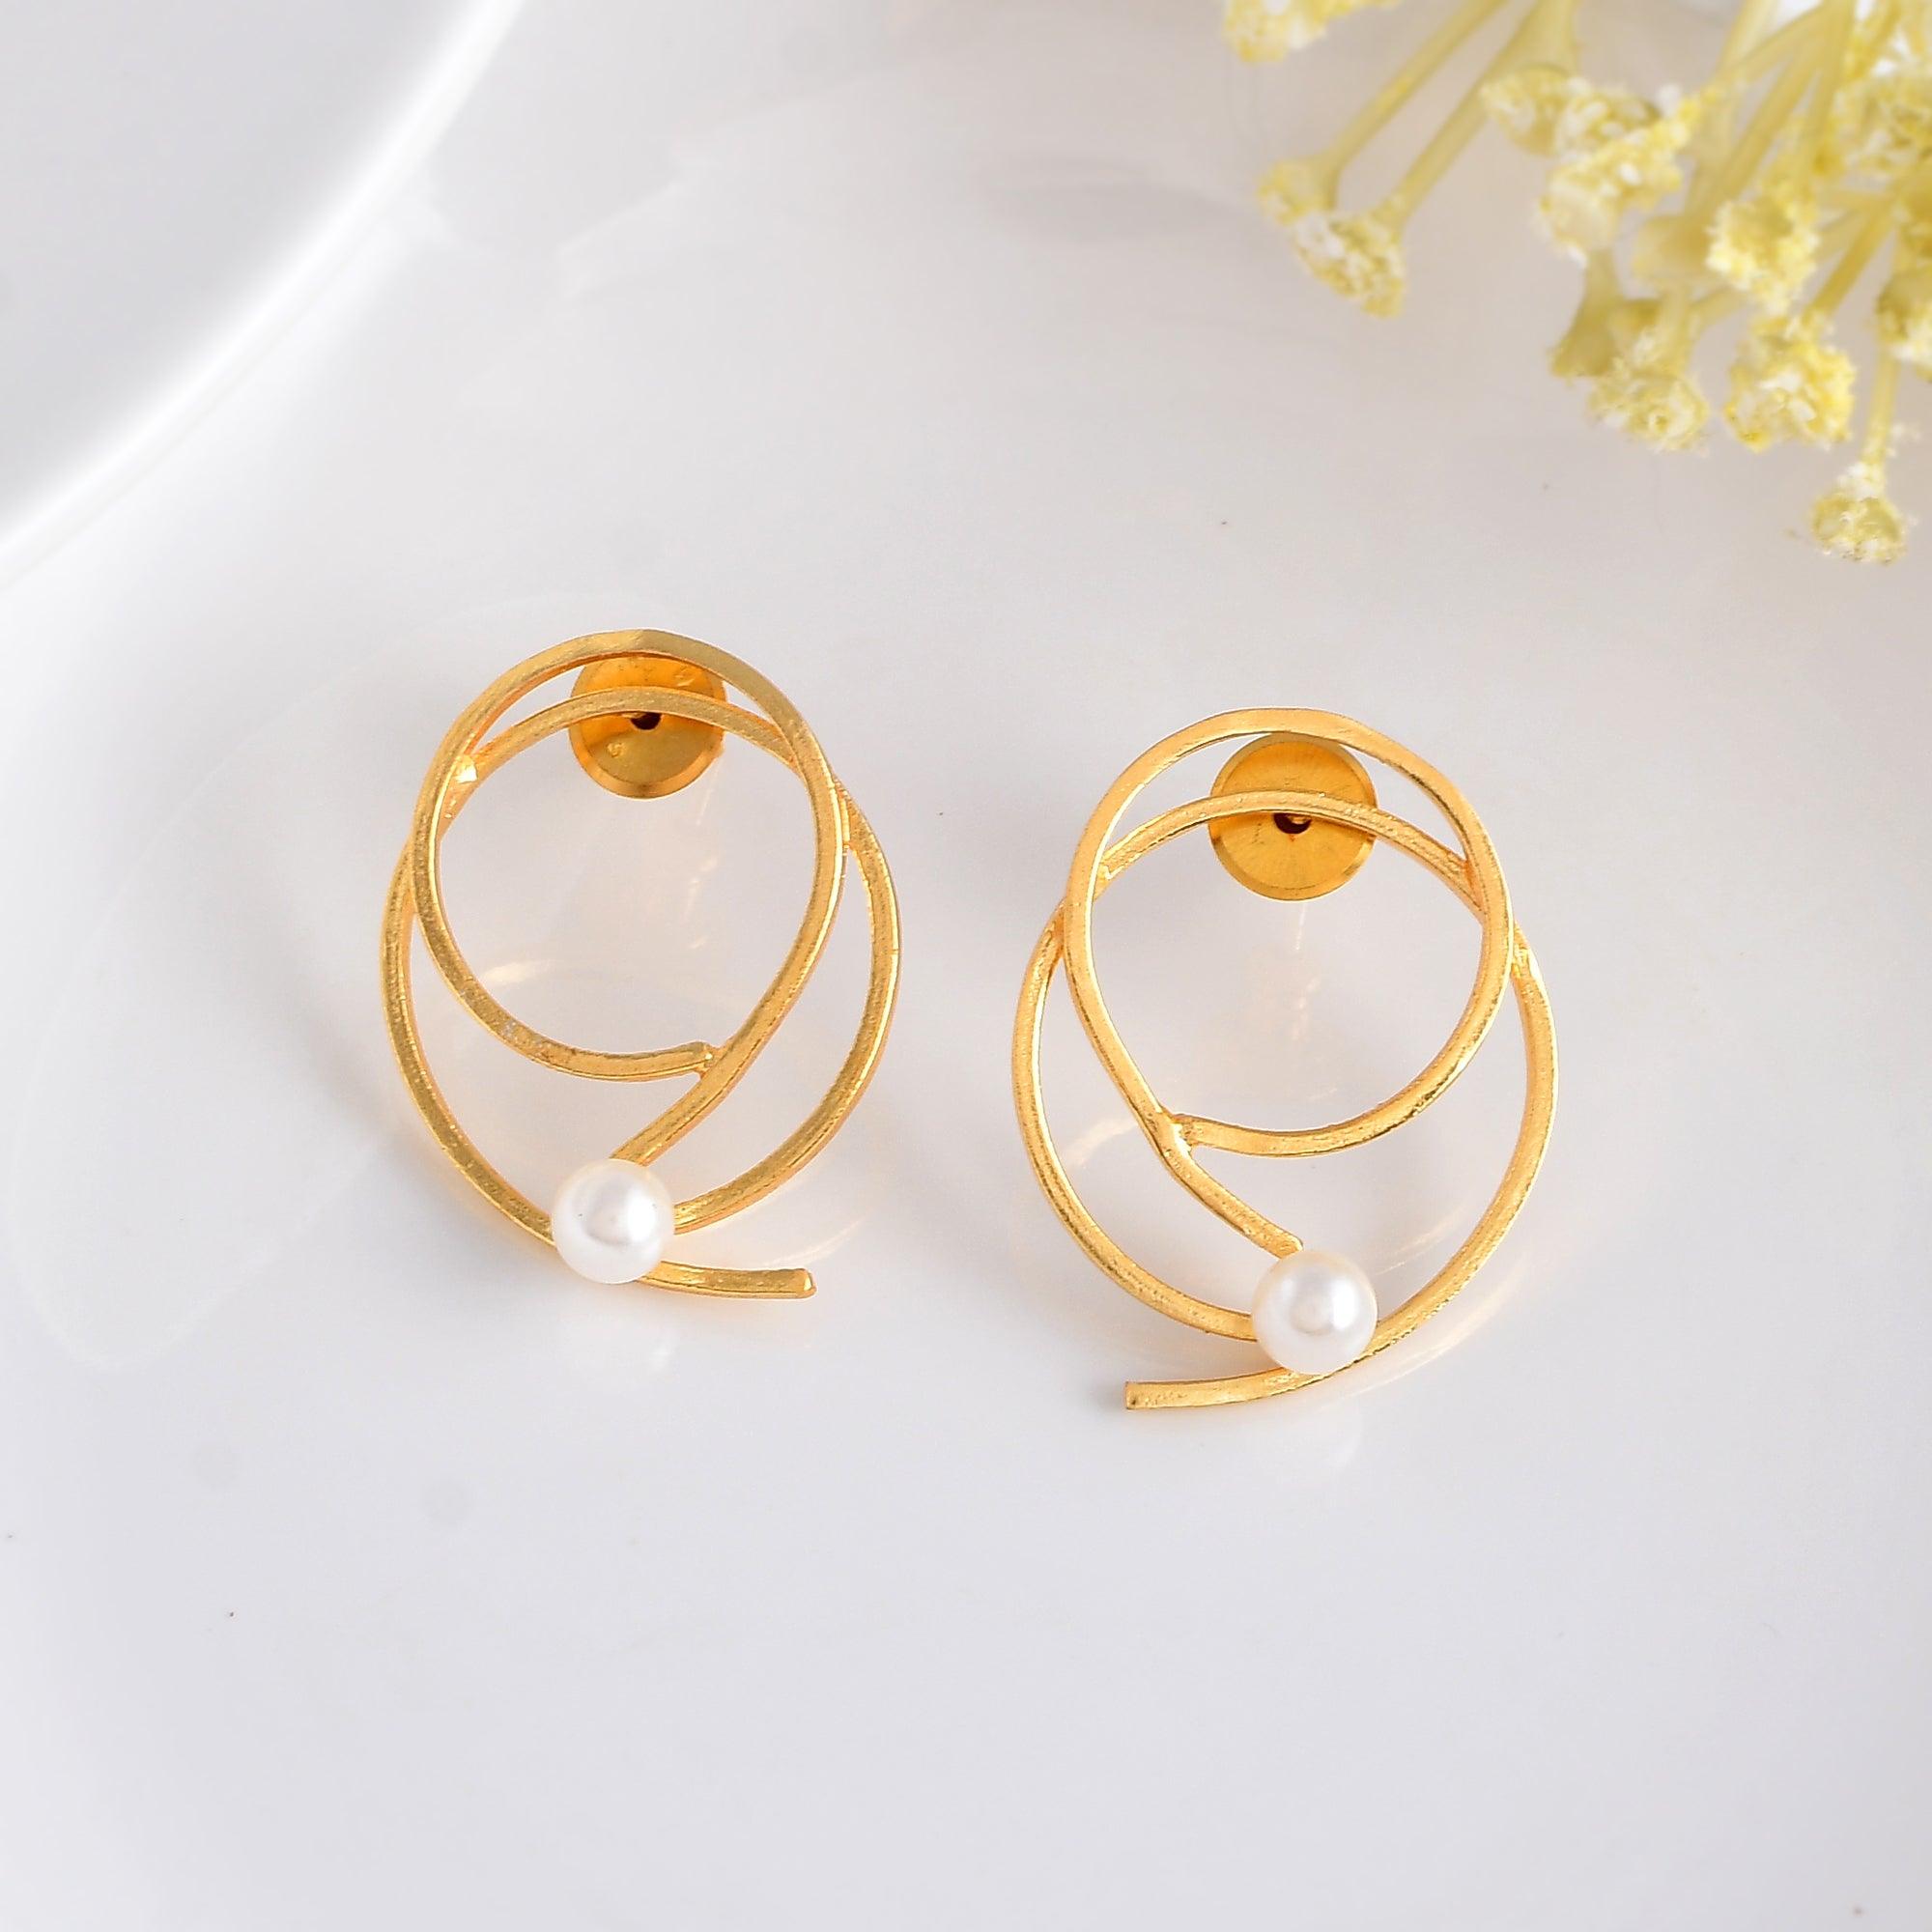 Pearl Earrings Gold Women Earrings with Braided Rhinestones for Women  Versatile and Elegant Curved Snake Earrings Wedding Jewelry Accessories  Wedding Gift Ideas for Woman : Amazon.ca: Clothing, Shoes & Accessories